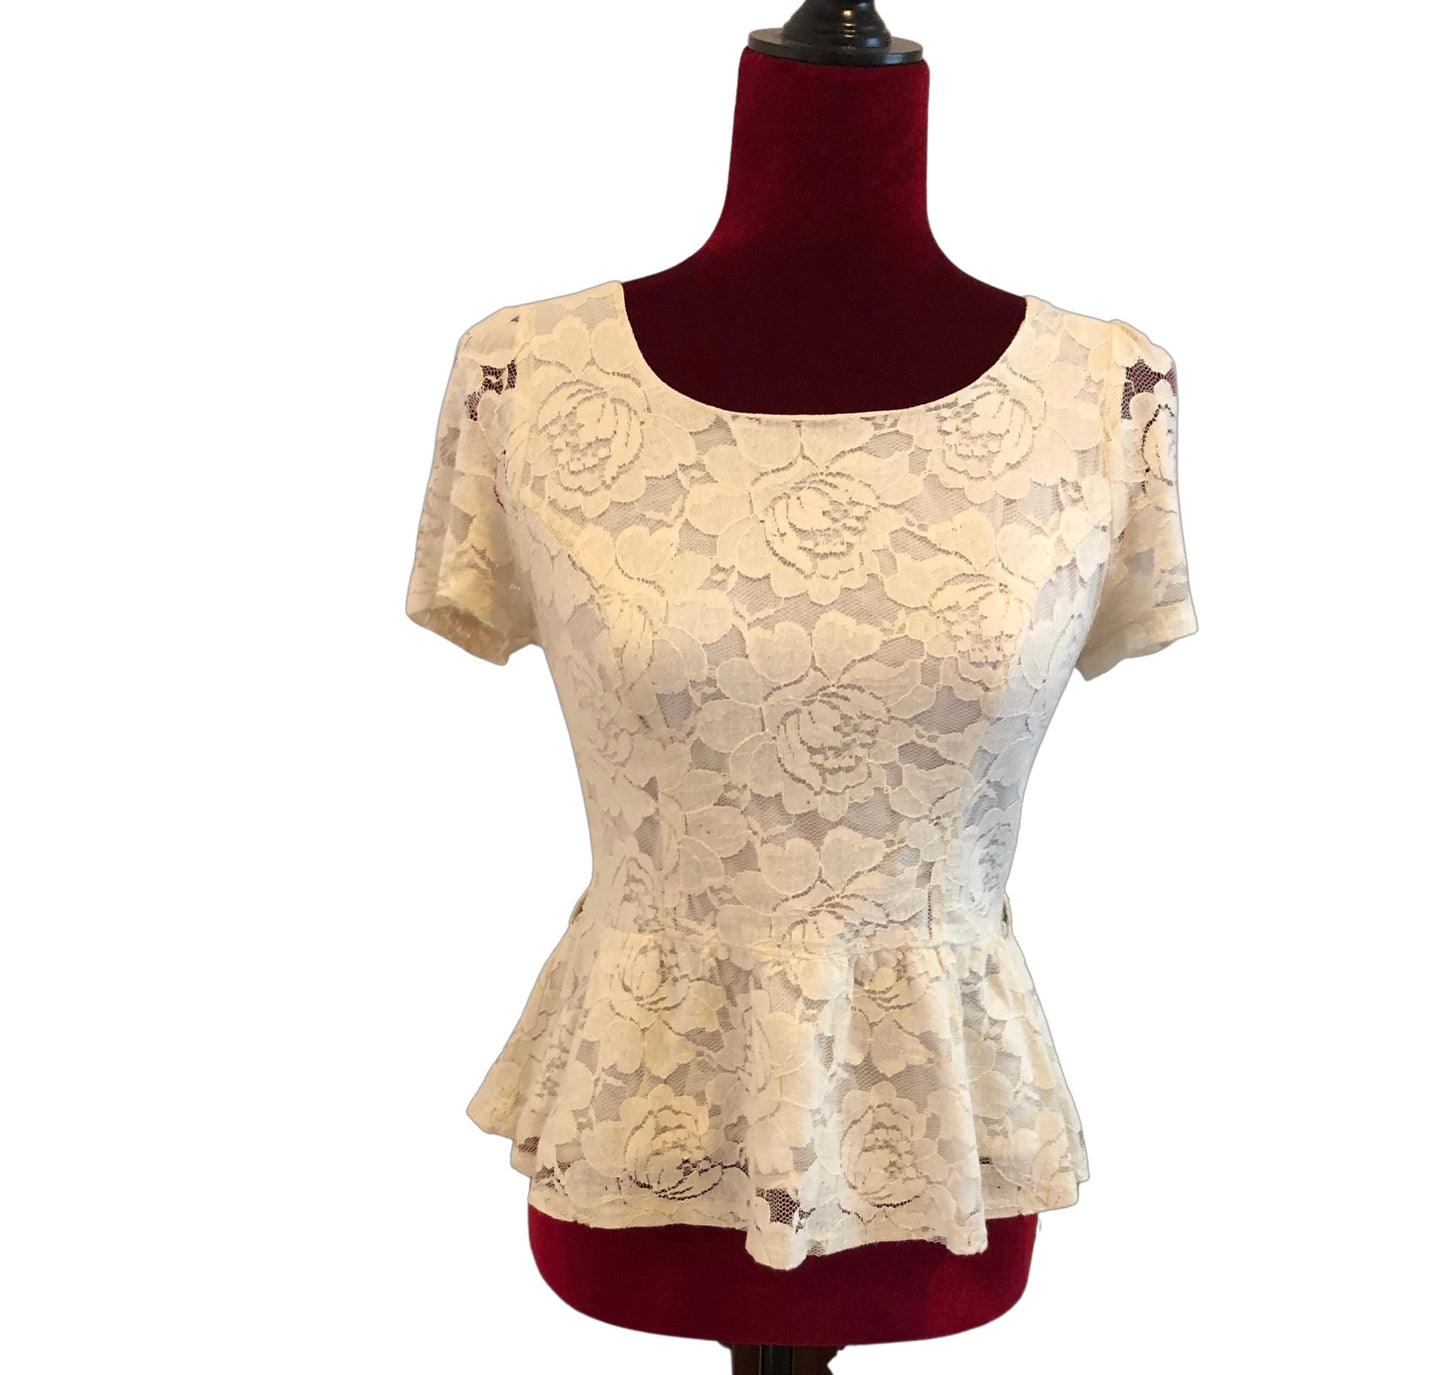 Hearts Brand Lace Fitted Blouse, Size Medium - Gently Used